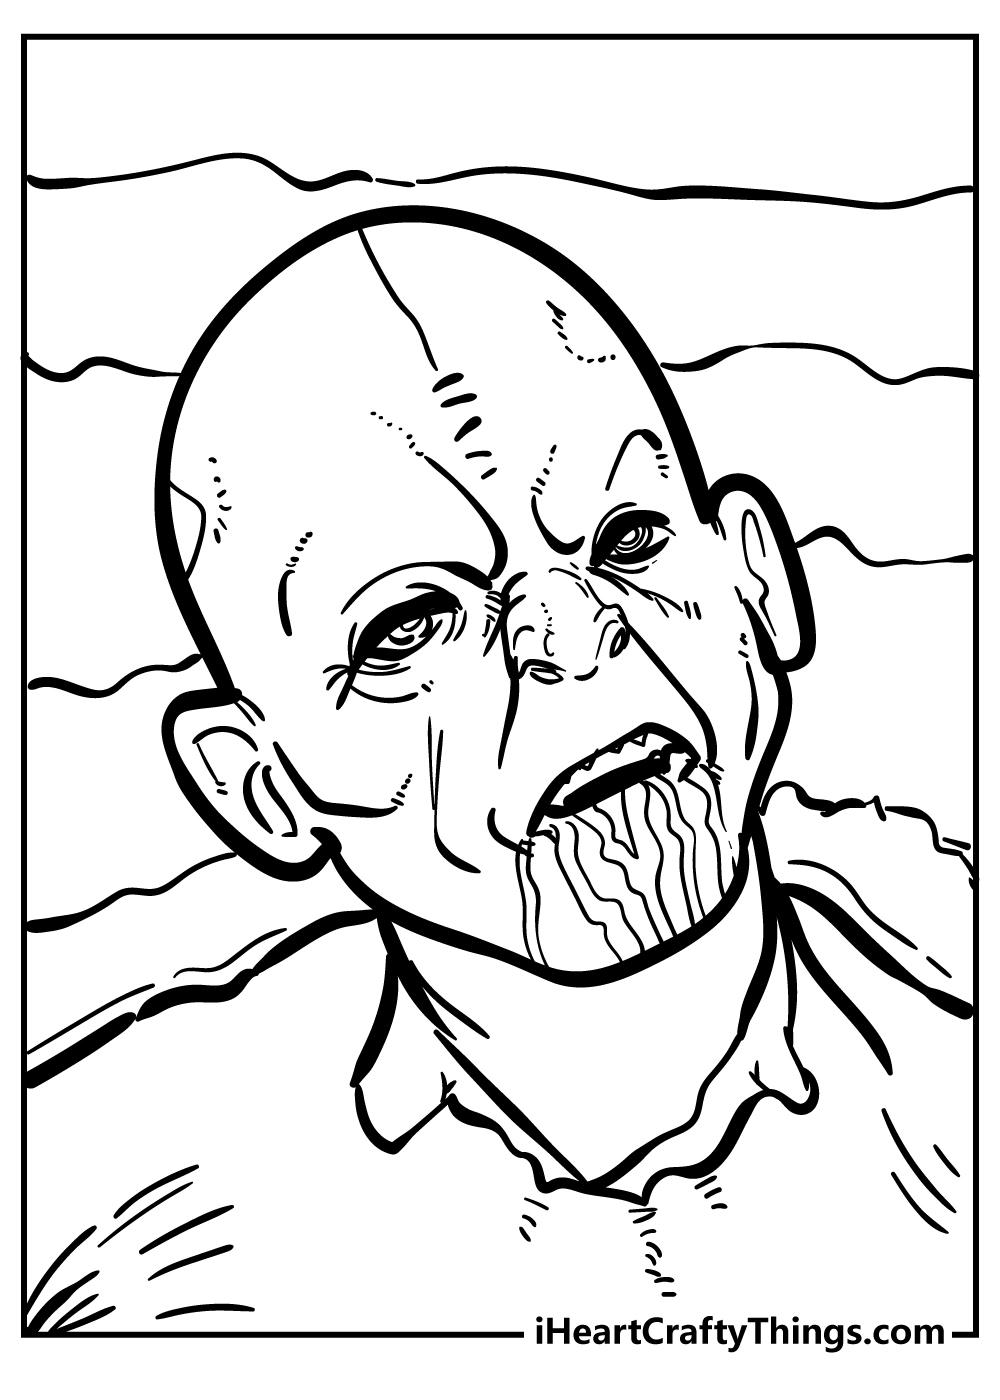 Creepy Coloring Pages for adults free printable